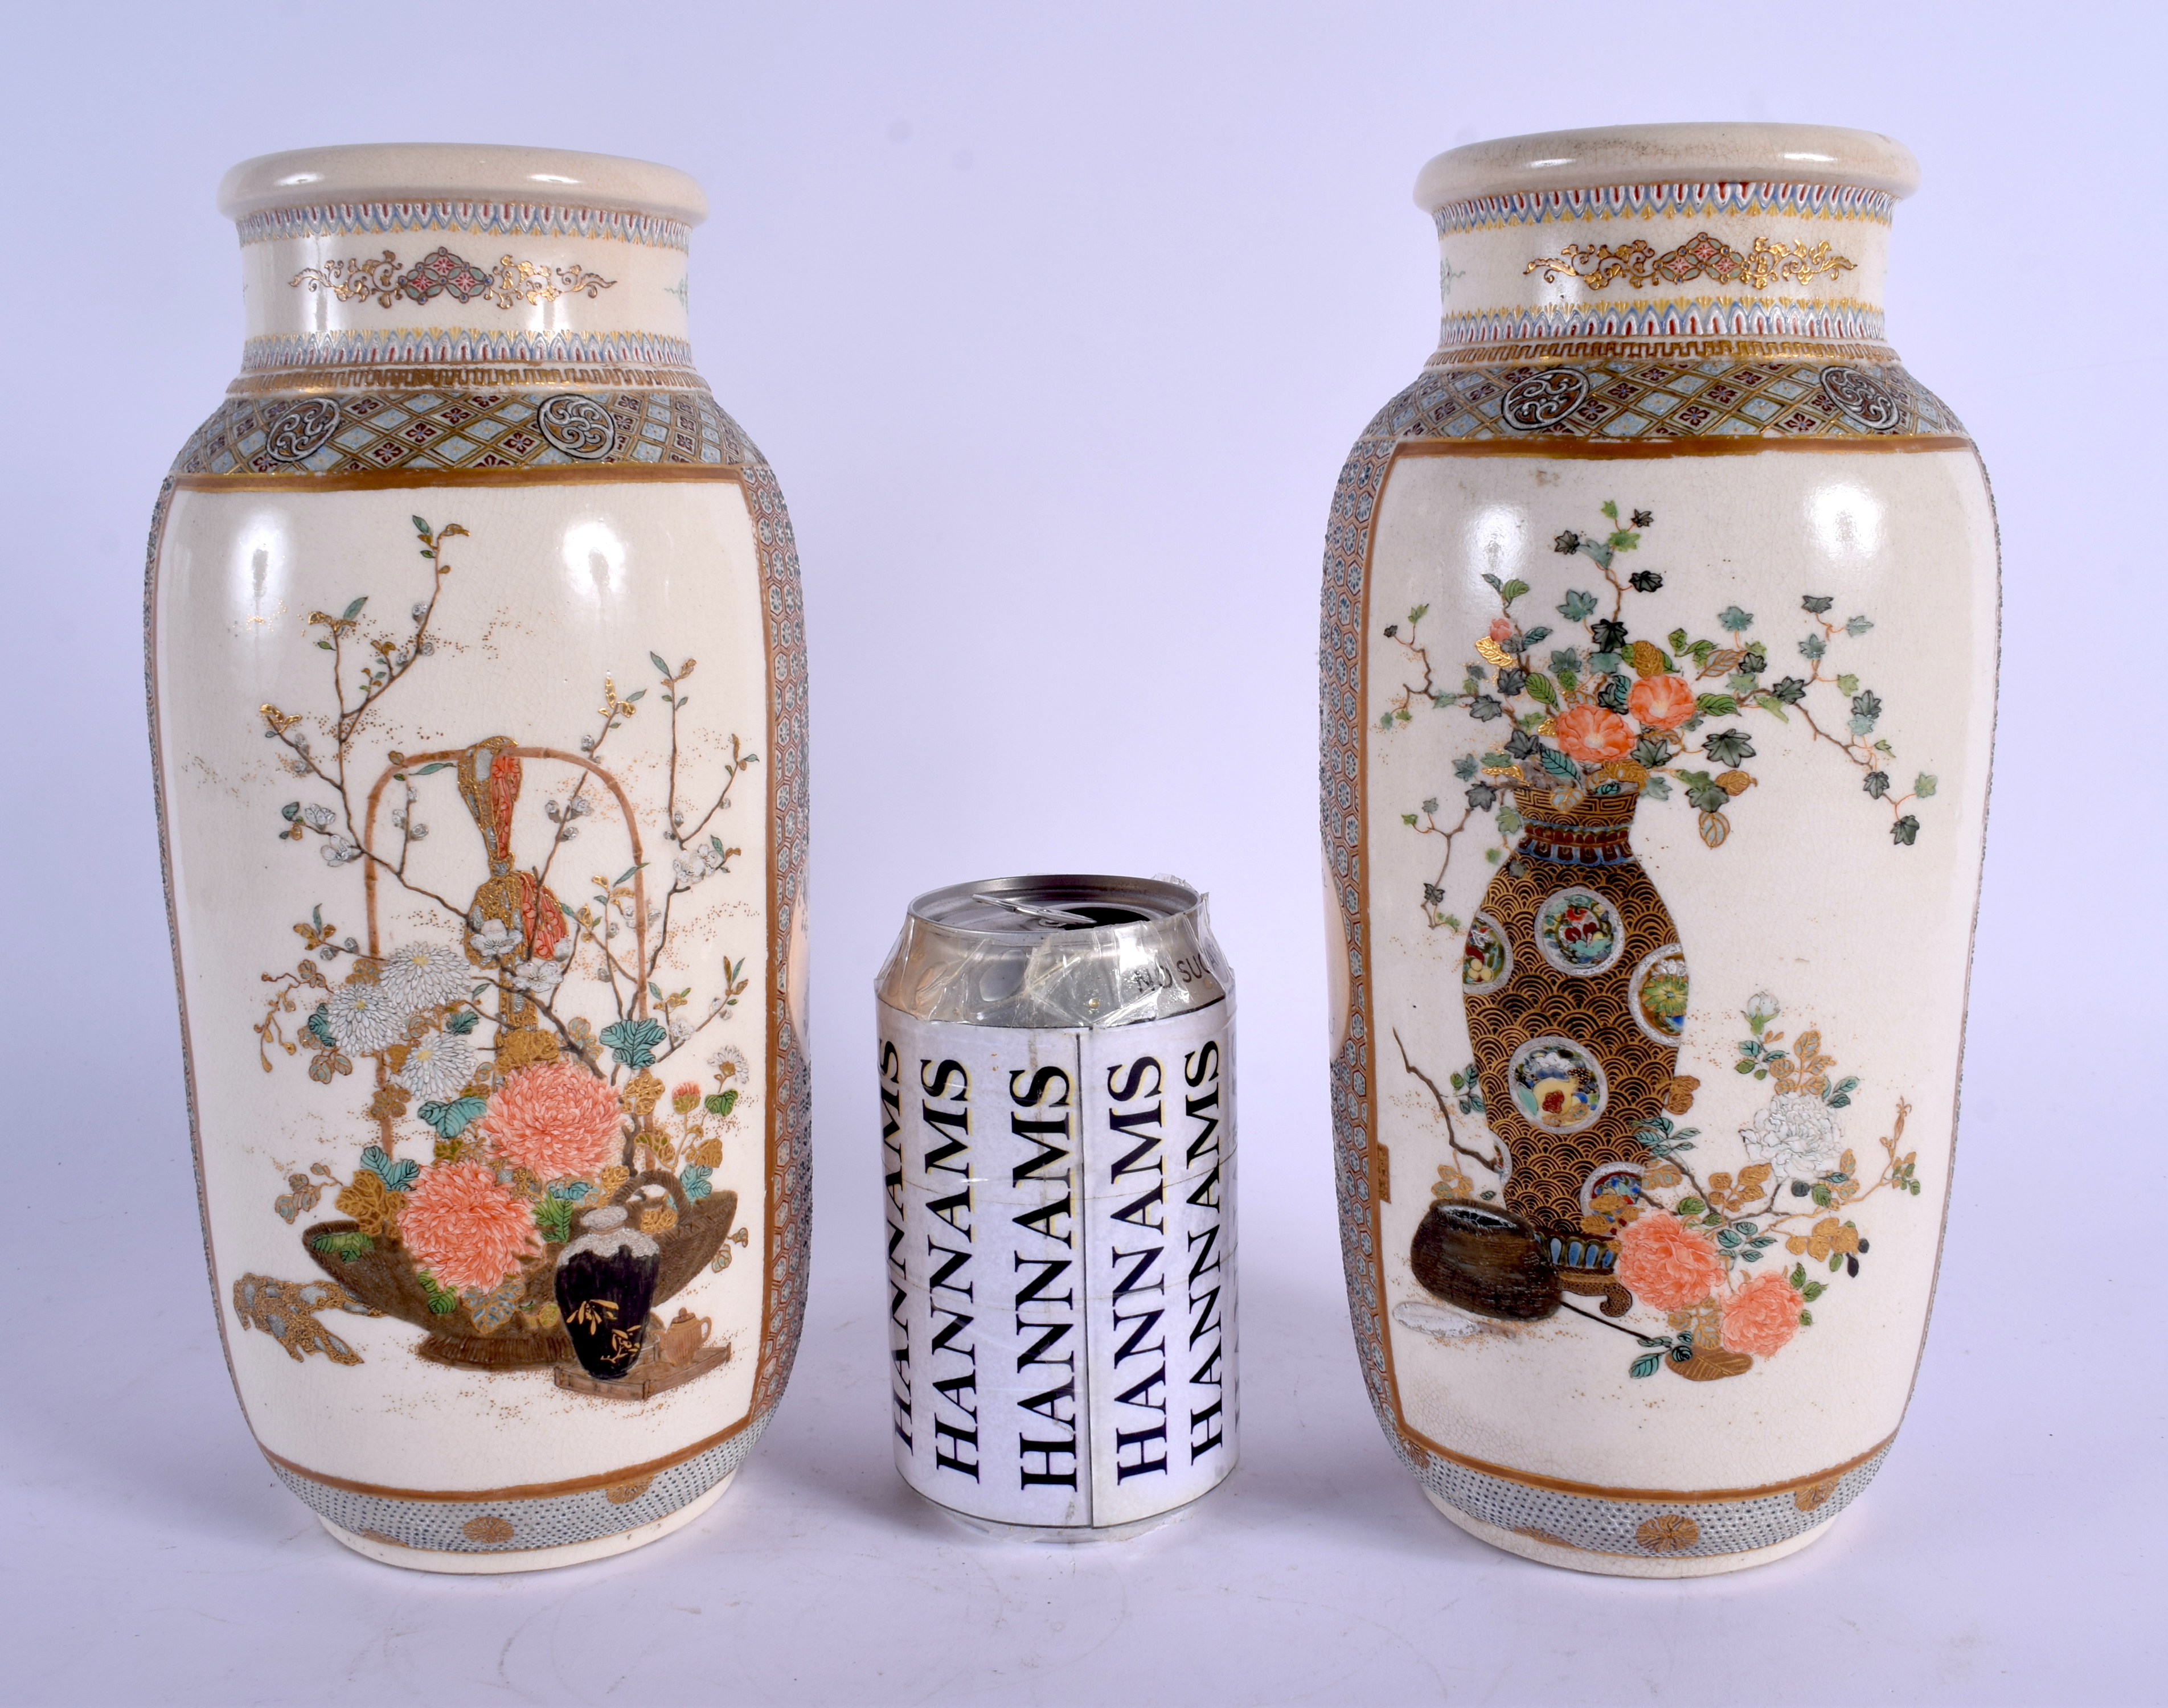 A PAIR OF 19TH CENTURY JAPANESE MEIJI PERIOD SATSUMA VASES painted with bonzai trees and high tables